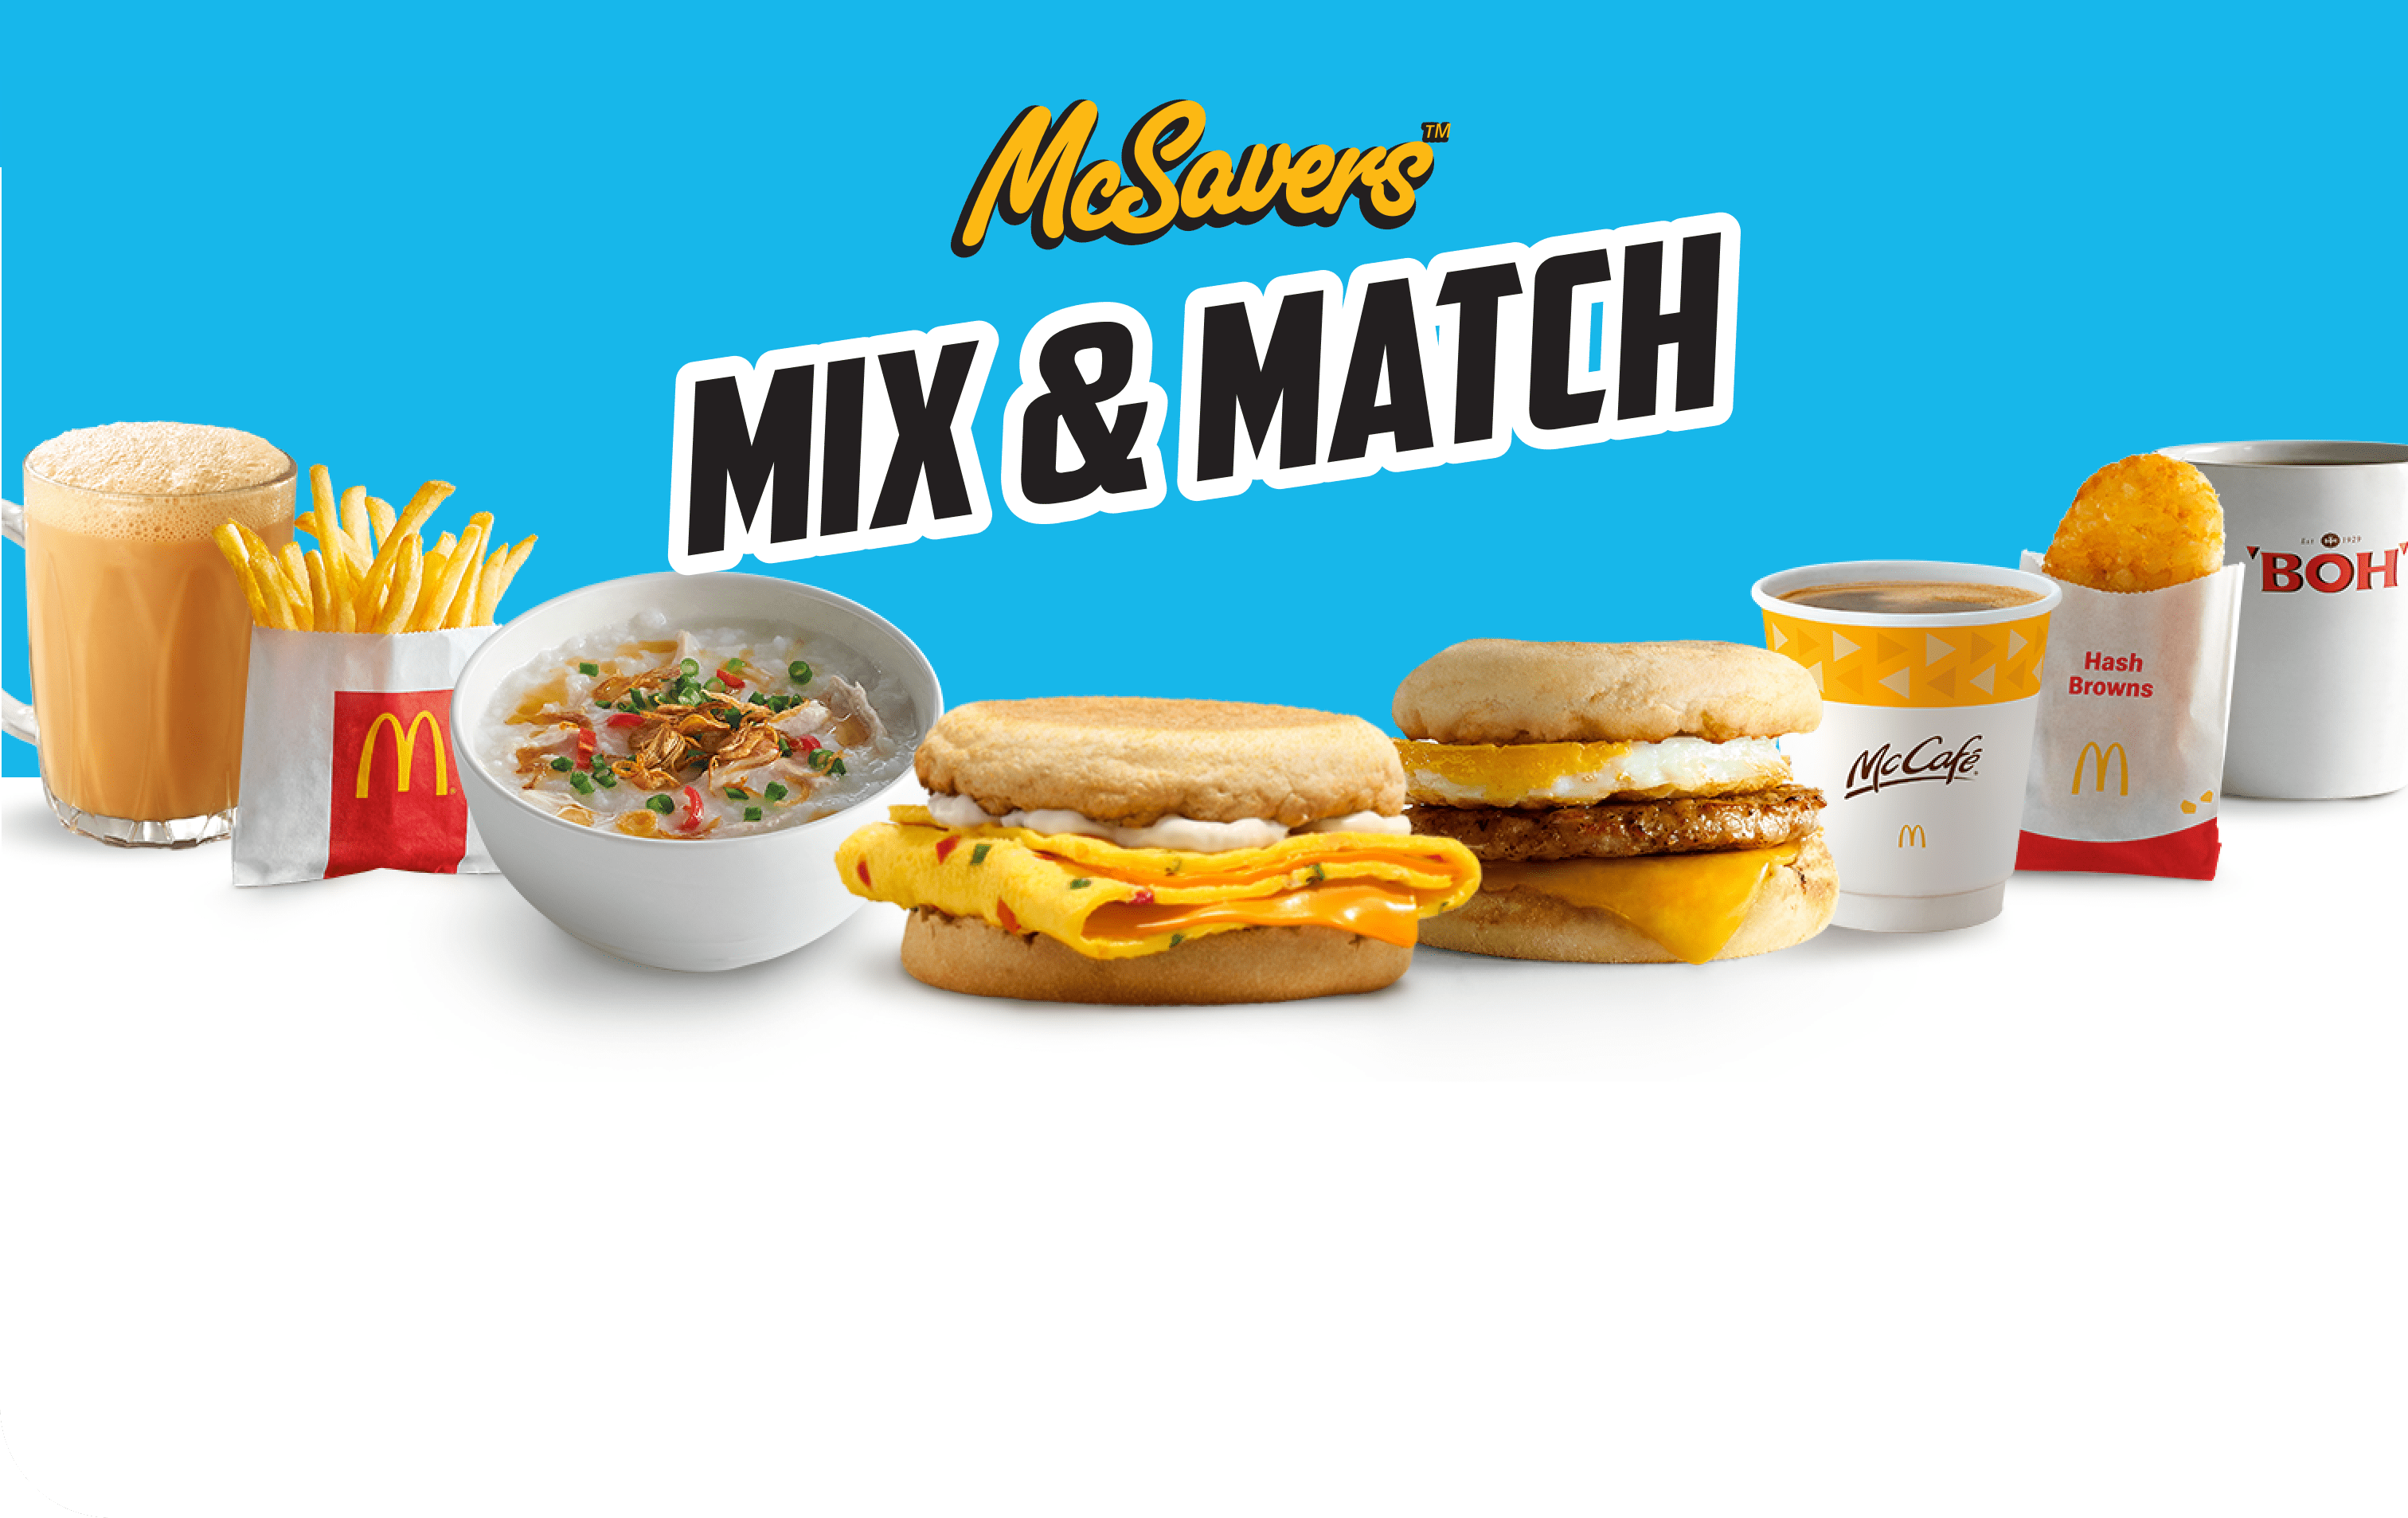 Pick and choose to satisfy your cravings with more value from McSavers